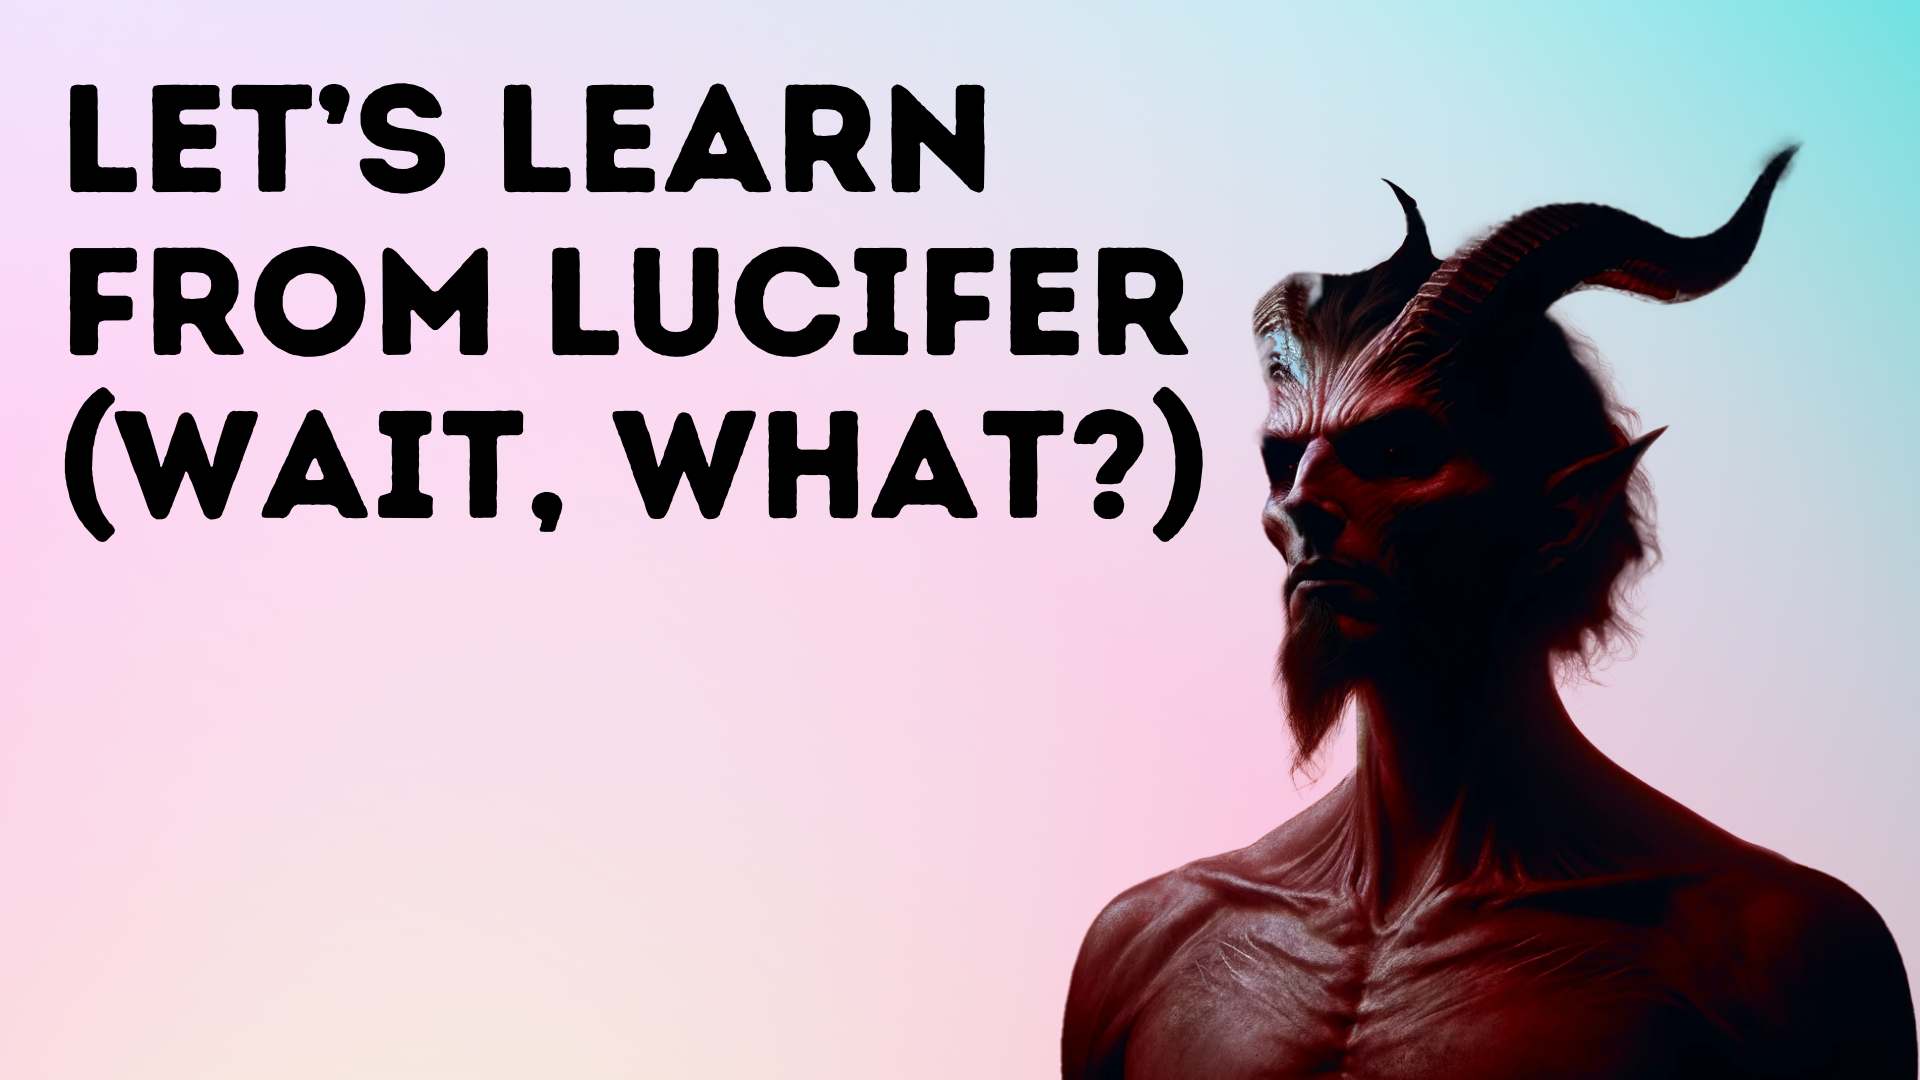 Let’s Learn from Lucifer (Wait, what?)